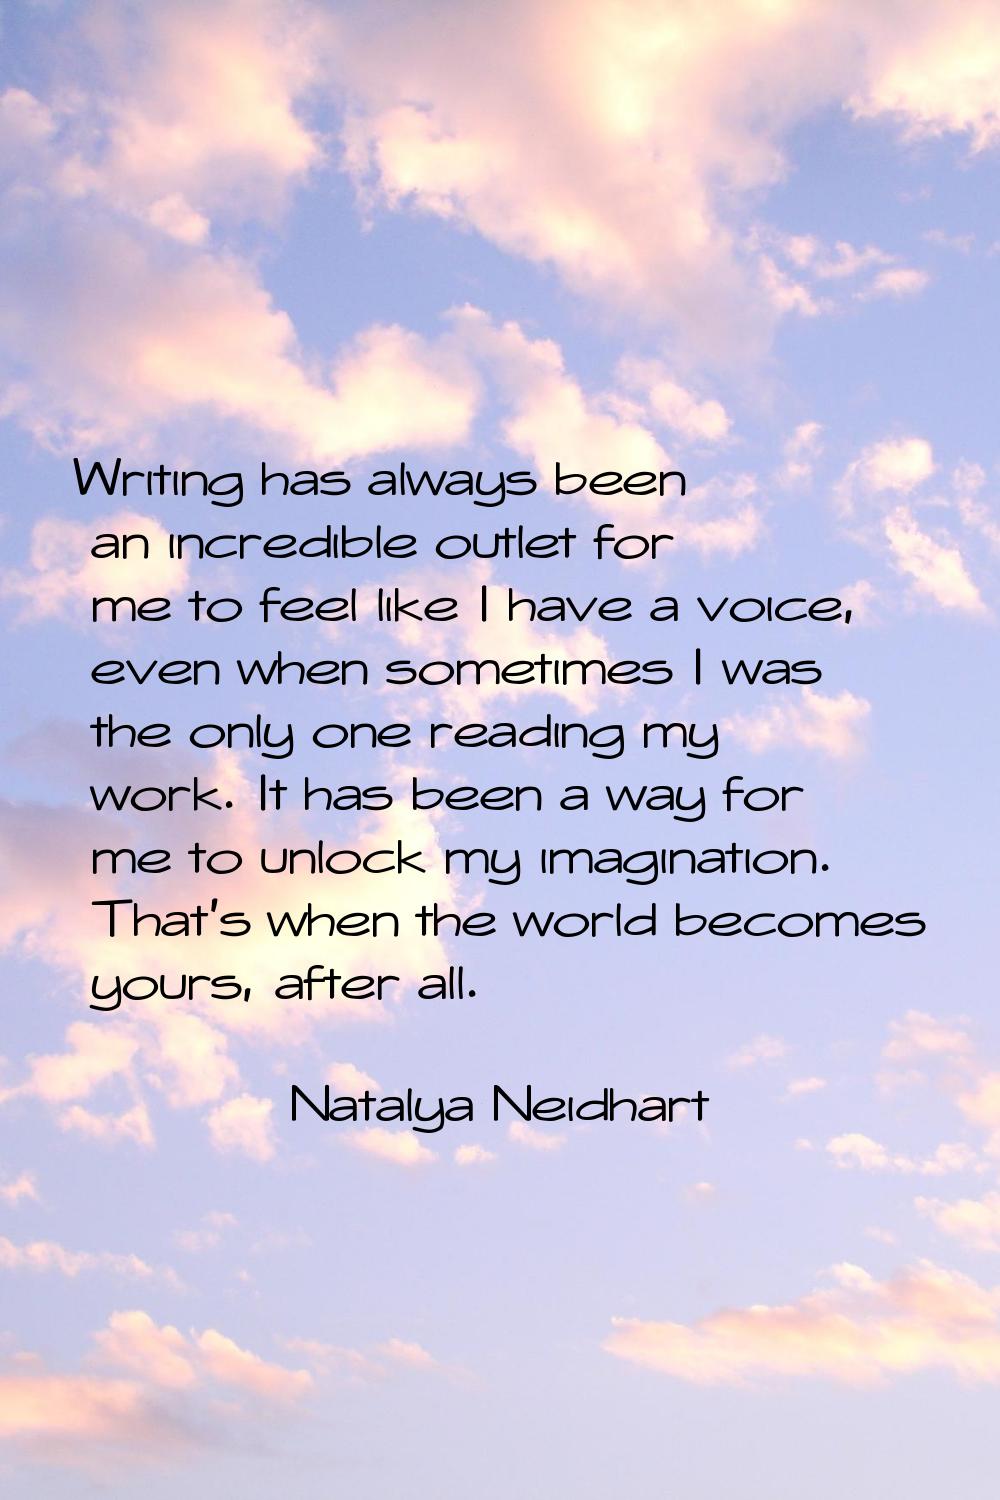 Writing has always been an incredible outlet for me to feel like I have a voice, even when sometime